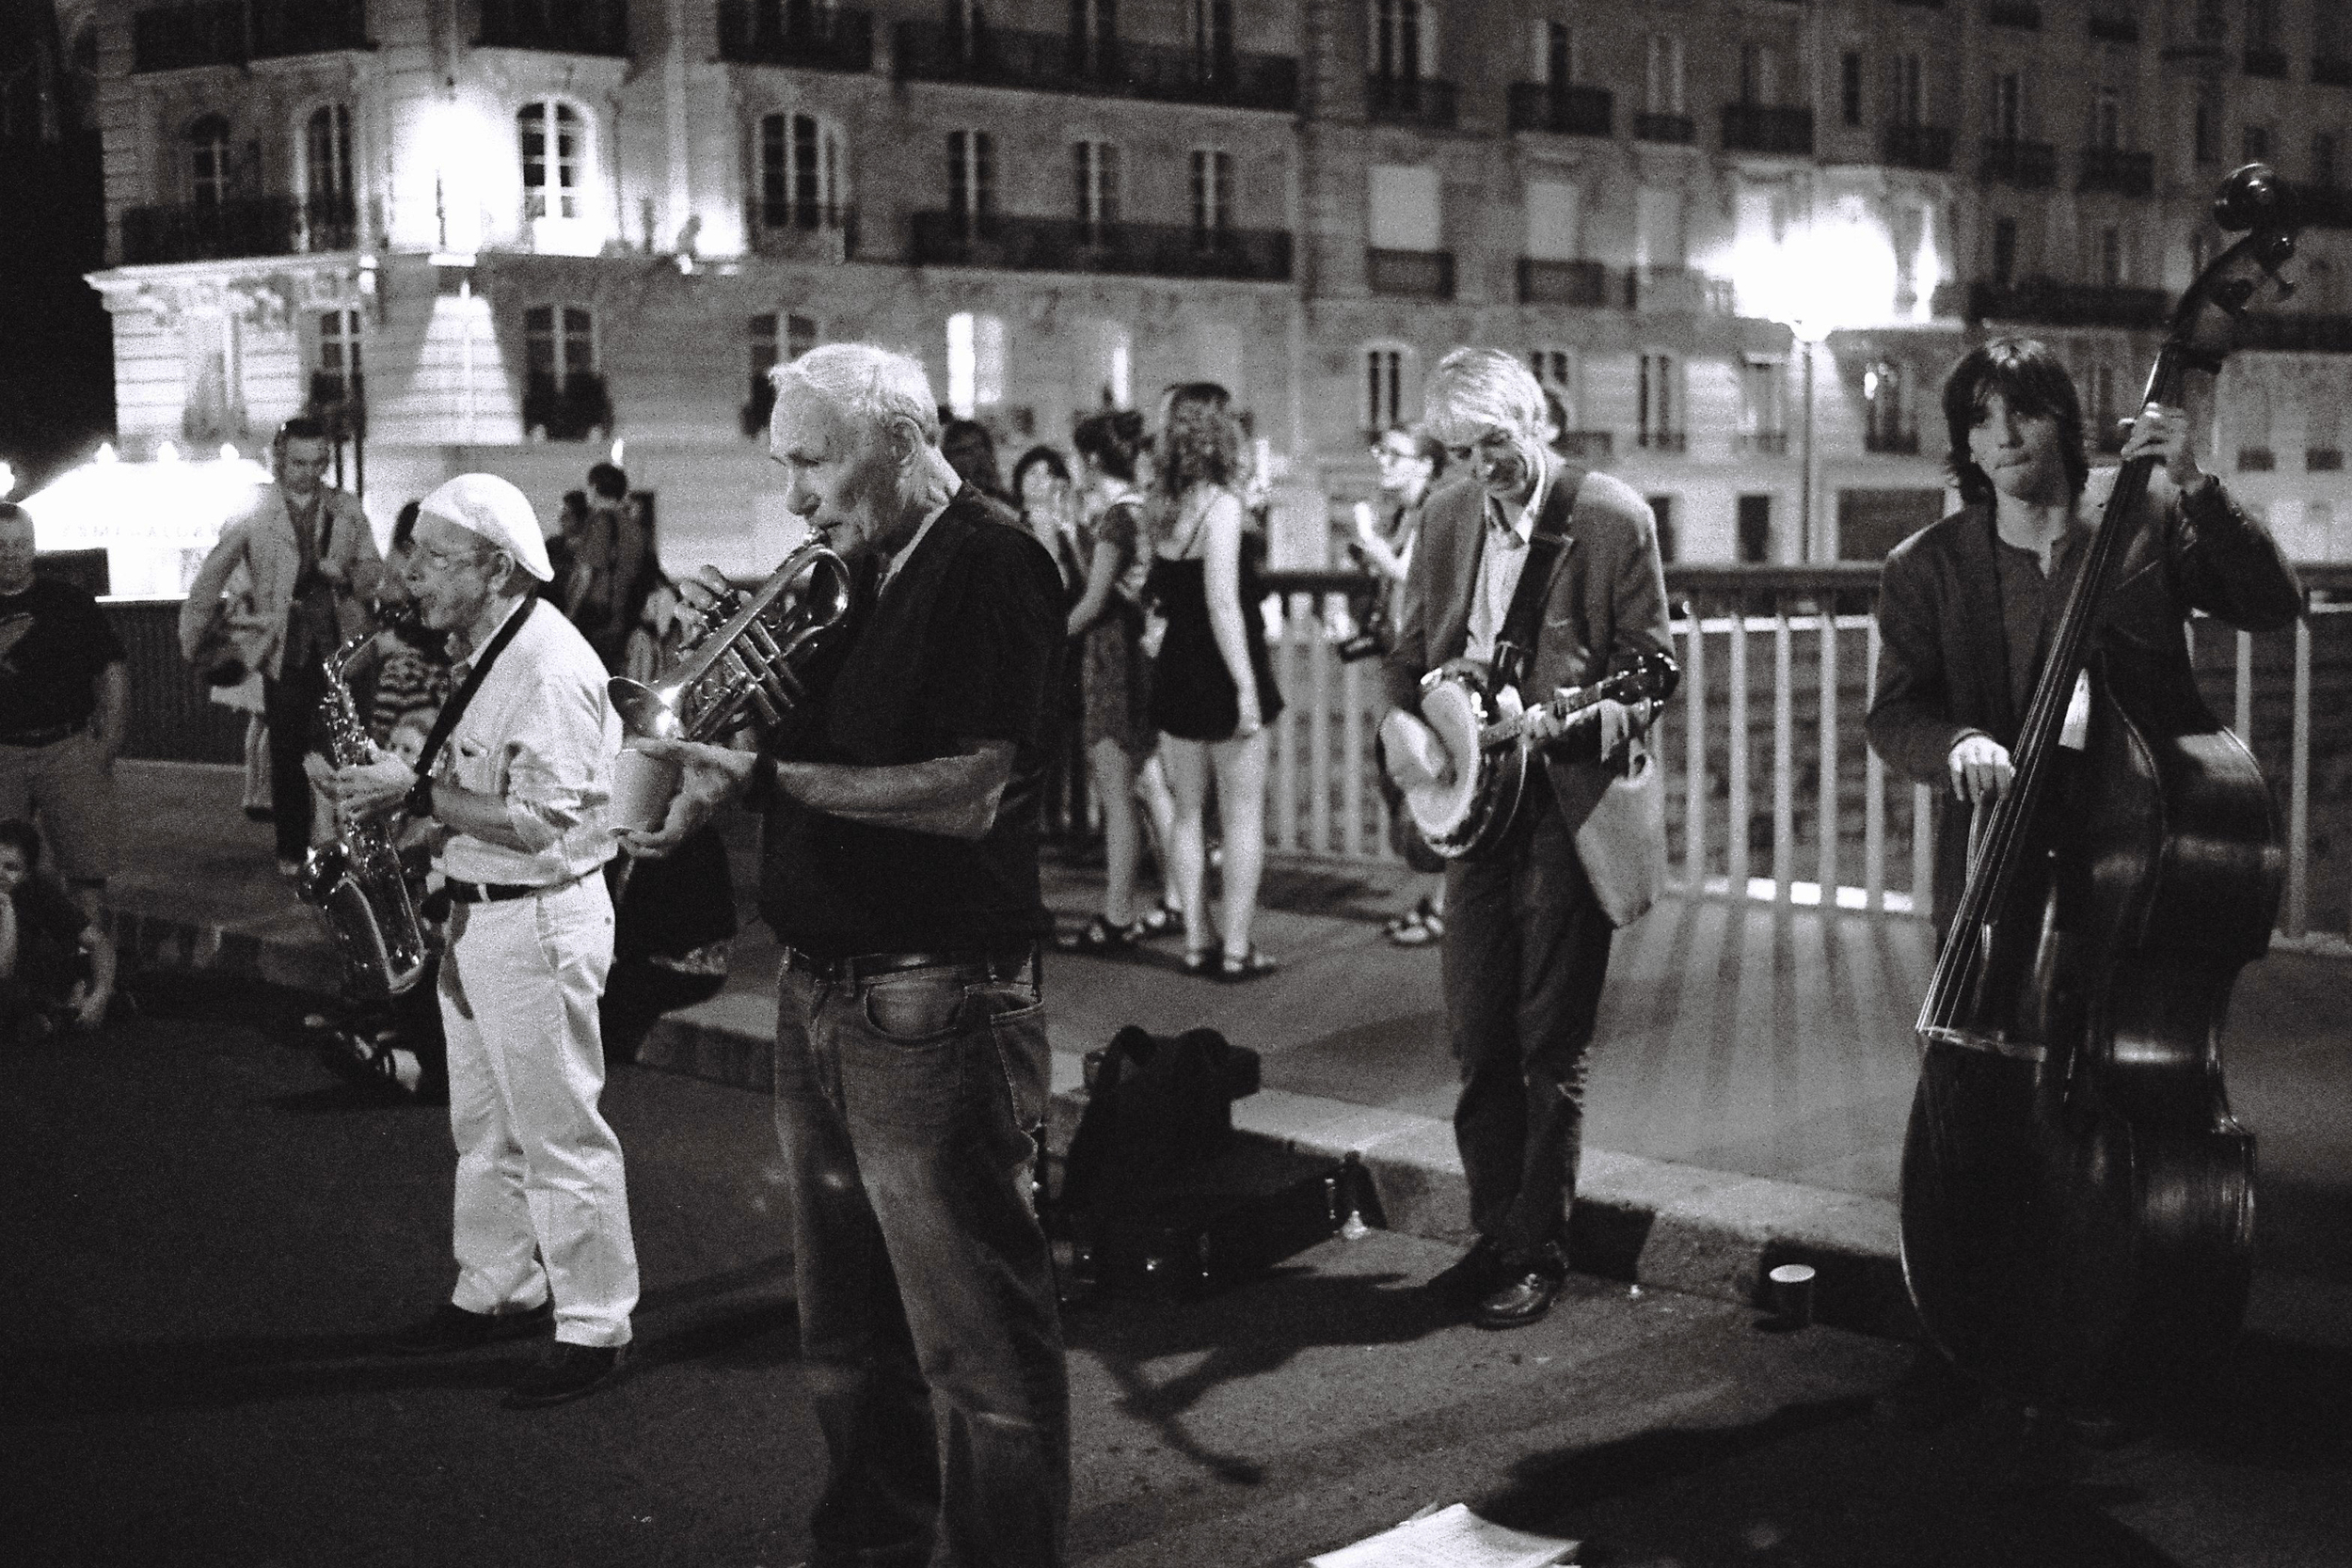 Musicians performing on the bridge (2012)